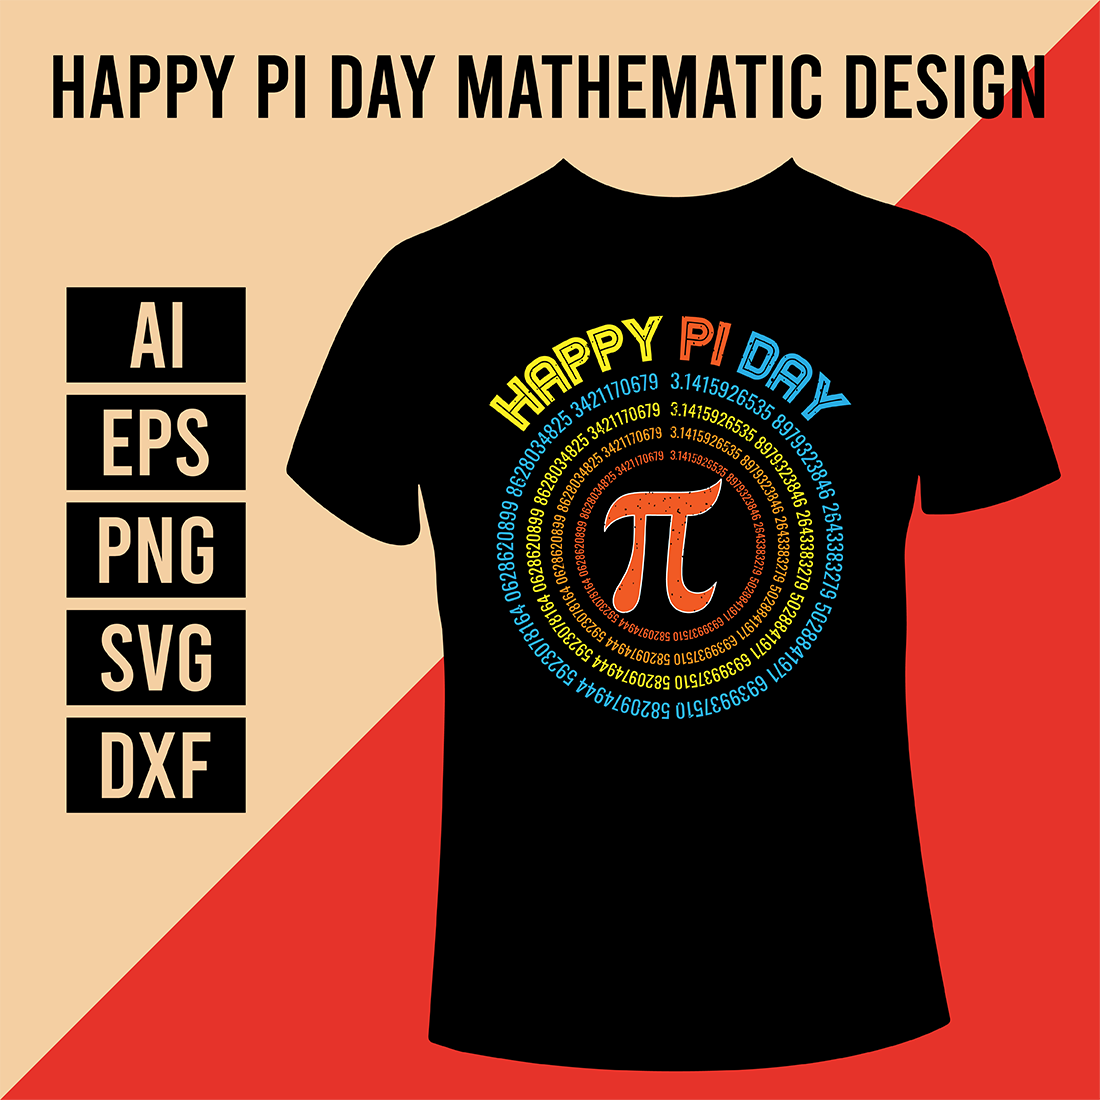 Happy Pi Day Mathematic T-Shirt Design cover image.